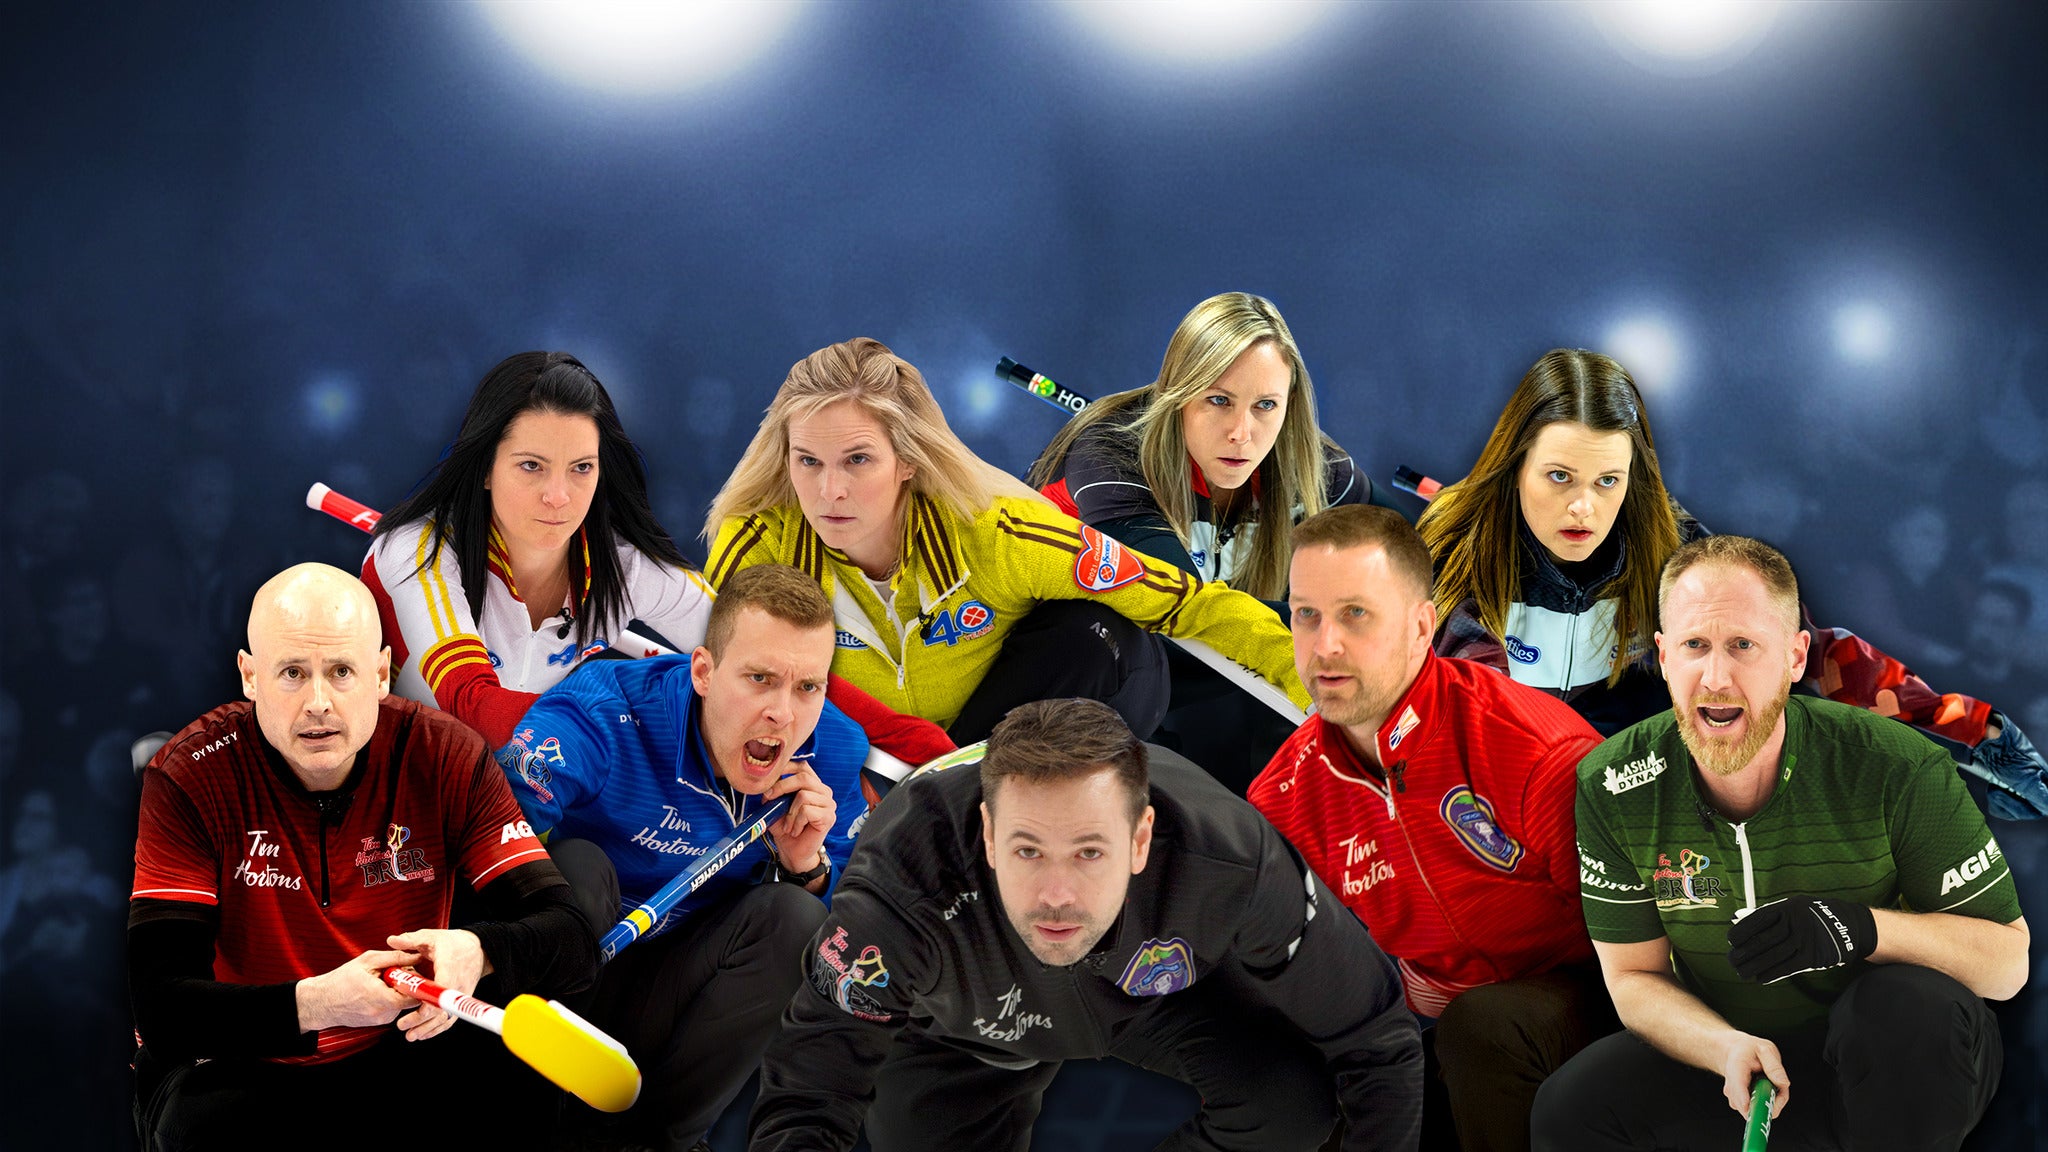 2021 Tim Hortons Curling Trials in Saskatoon promo photo for Curling Canada presale offer code